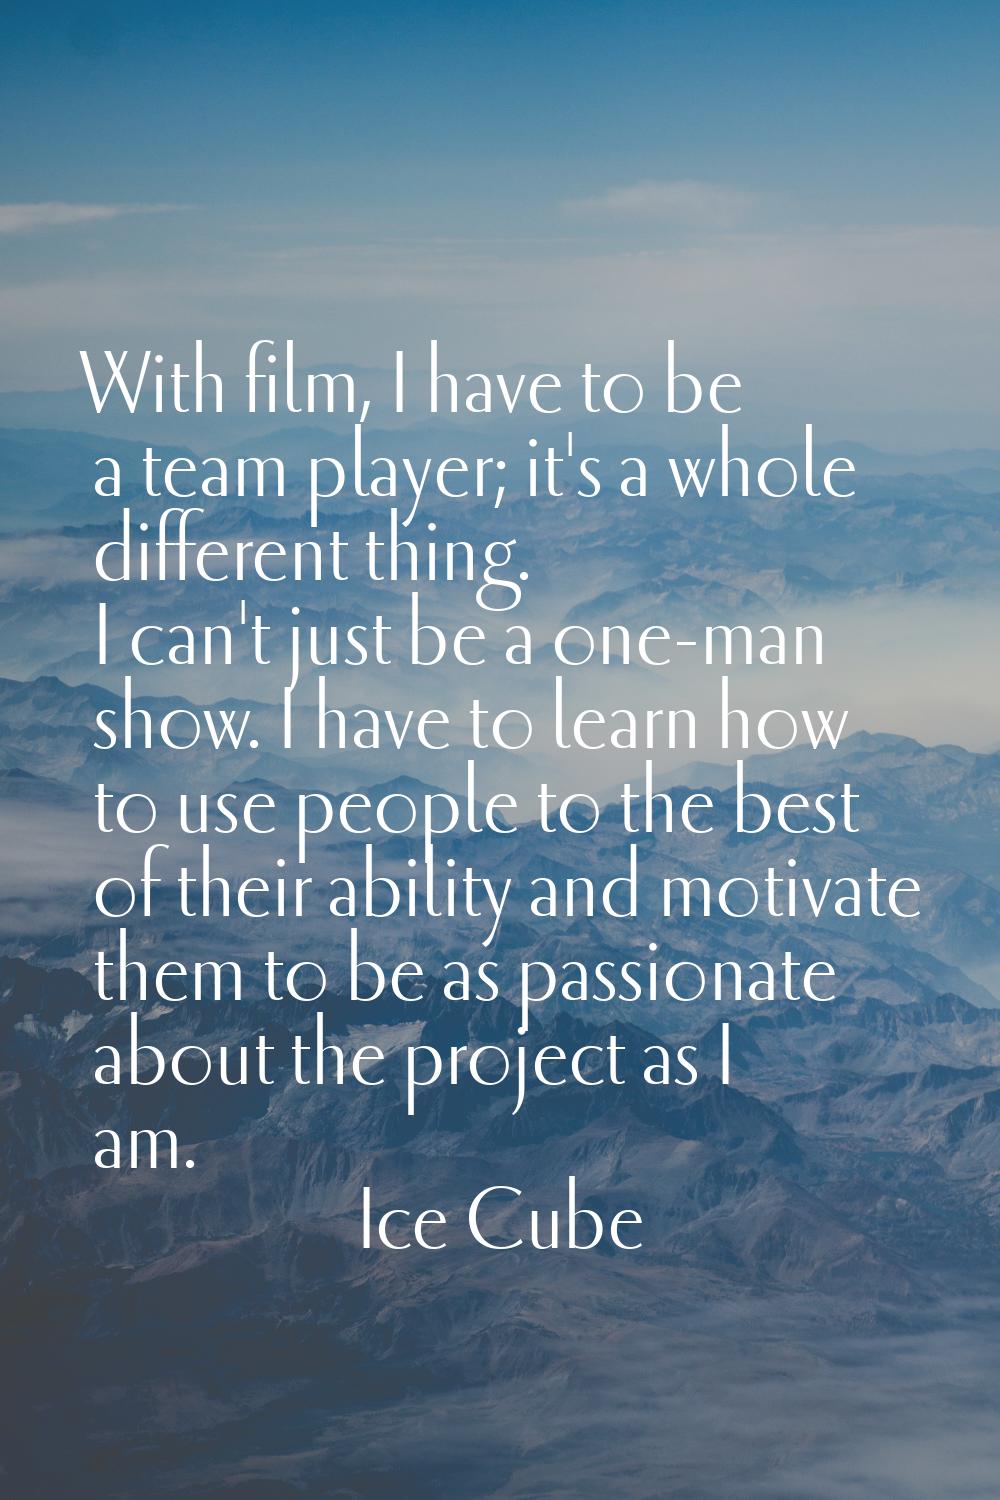 With film, I have to be a team player; it's a whole different thing. I can't just be a one-man show